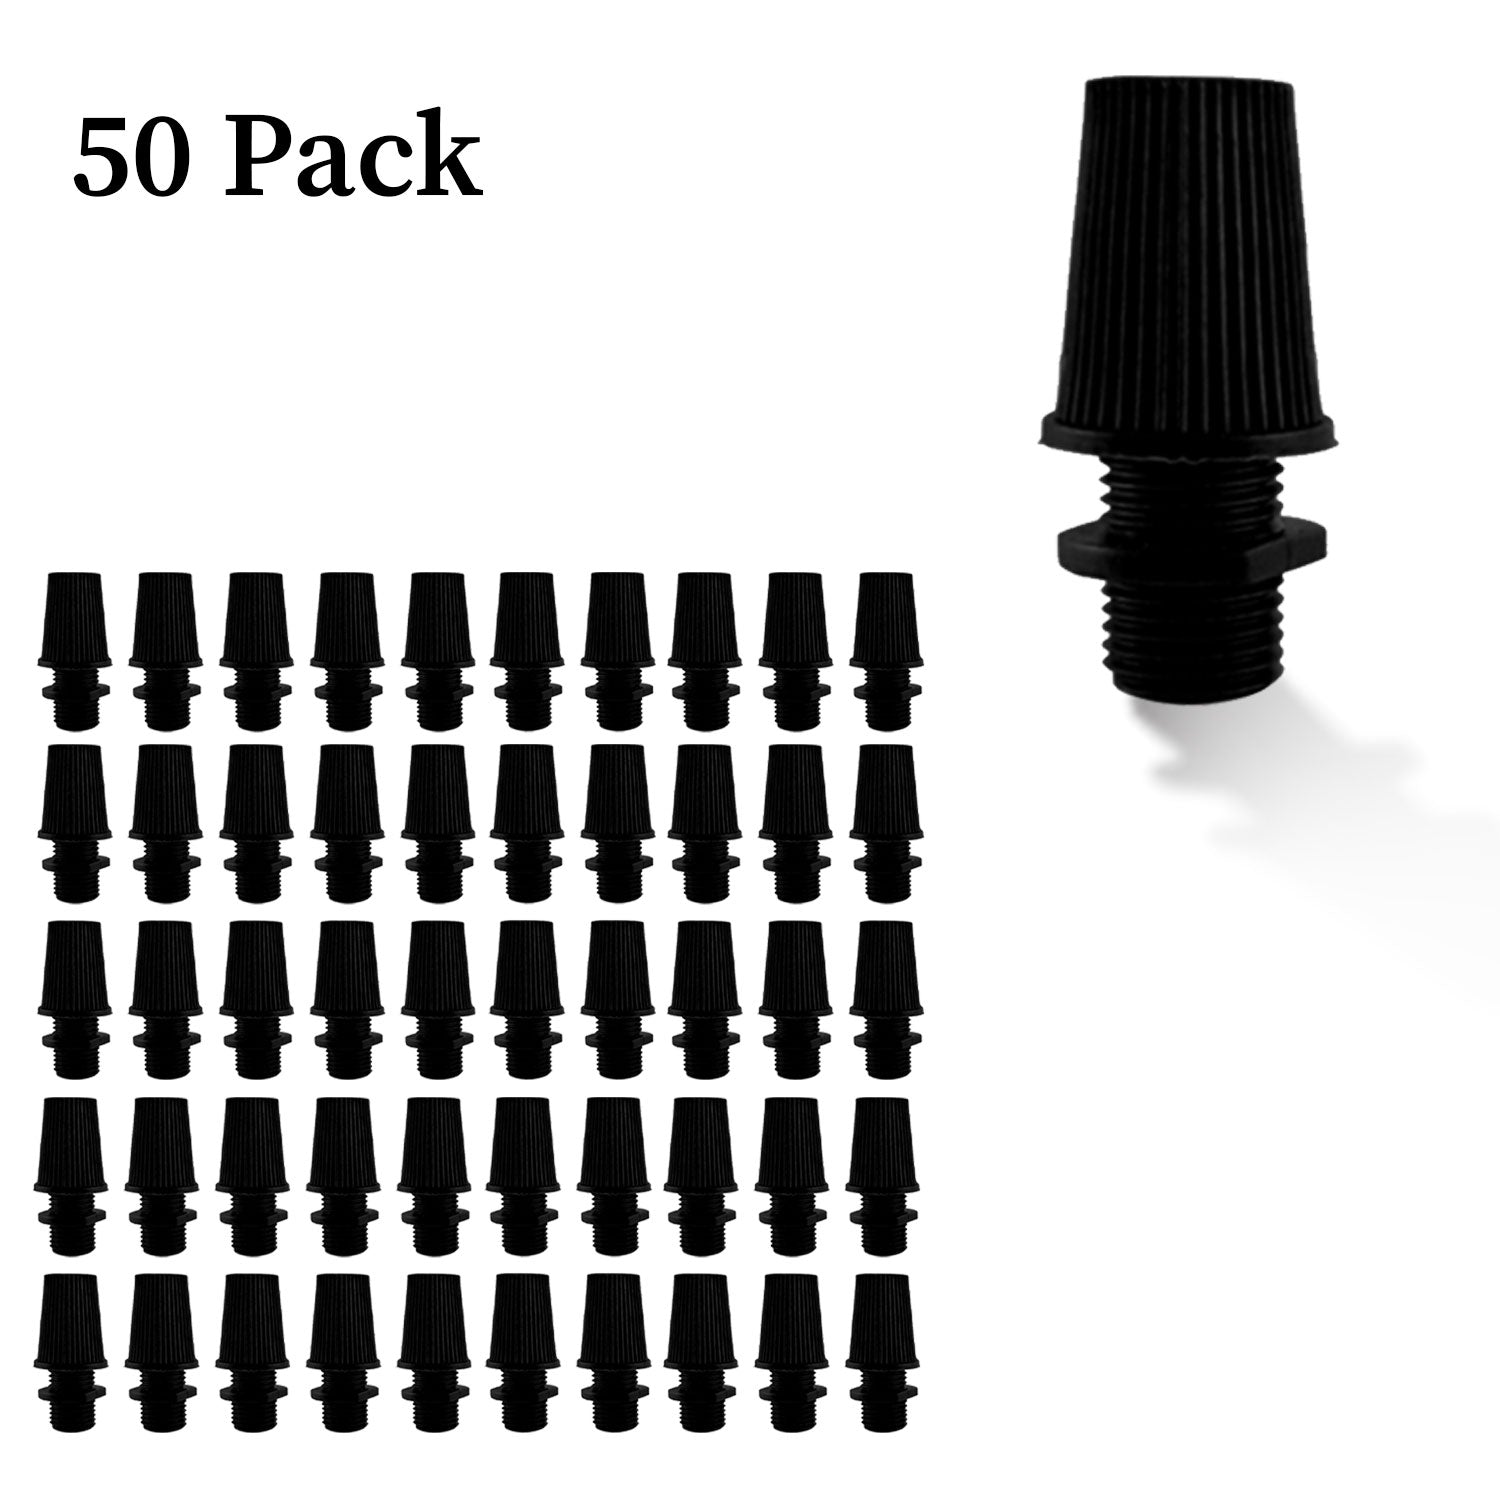 50 pack 100mm Black cable cord grip lock